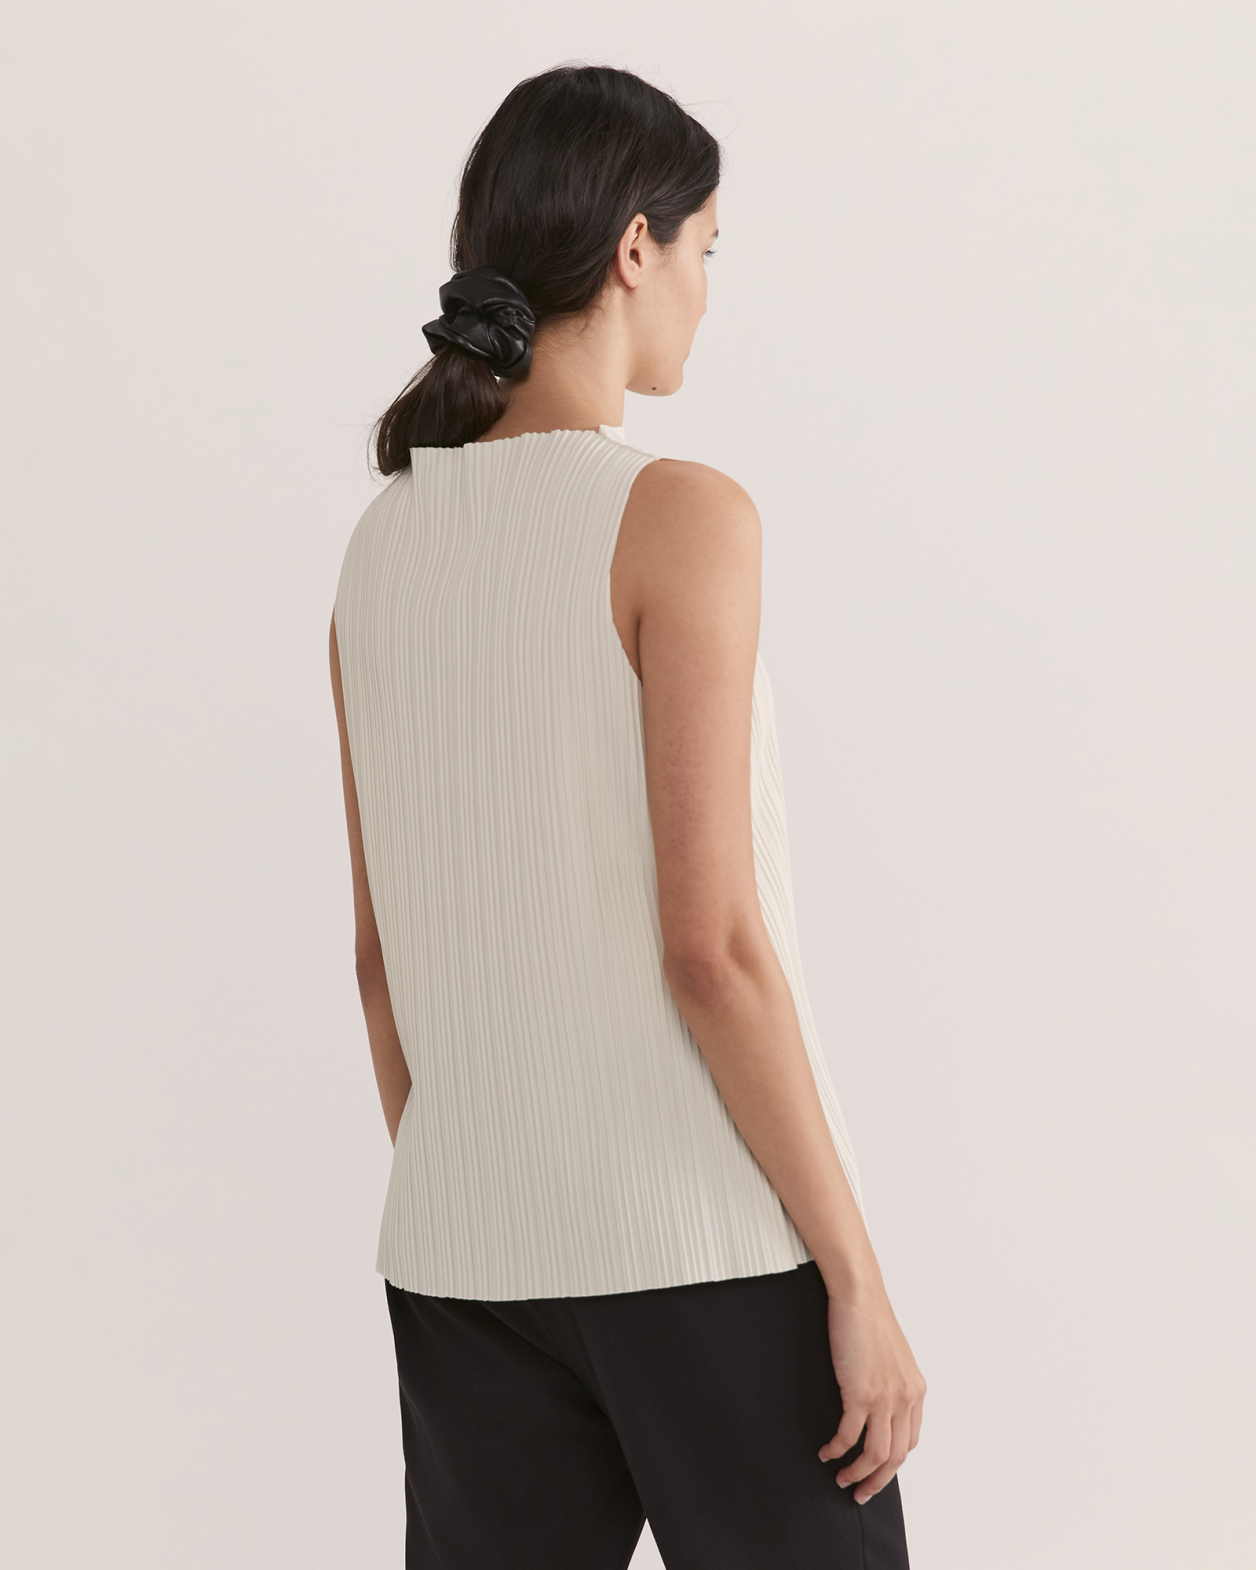 Leona Shell Top in IVORY